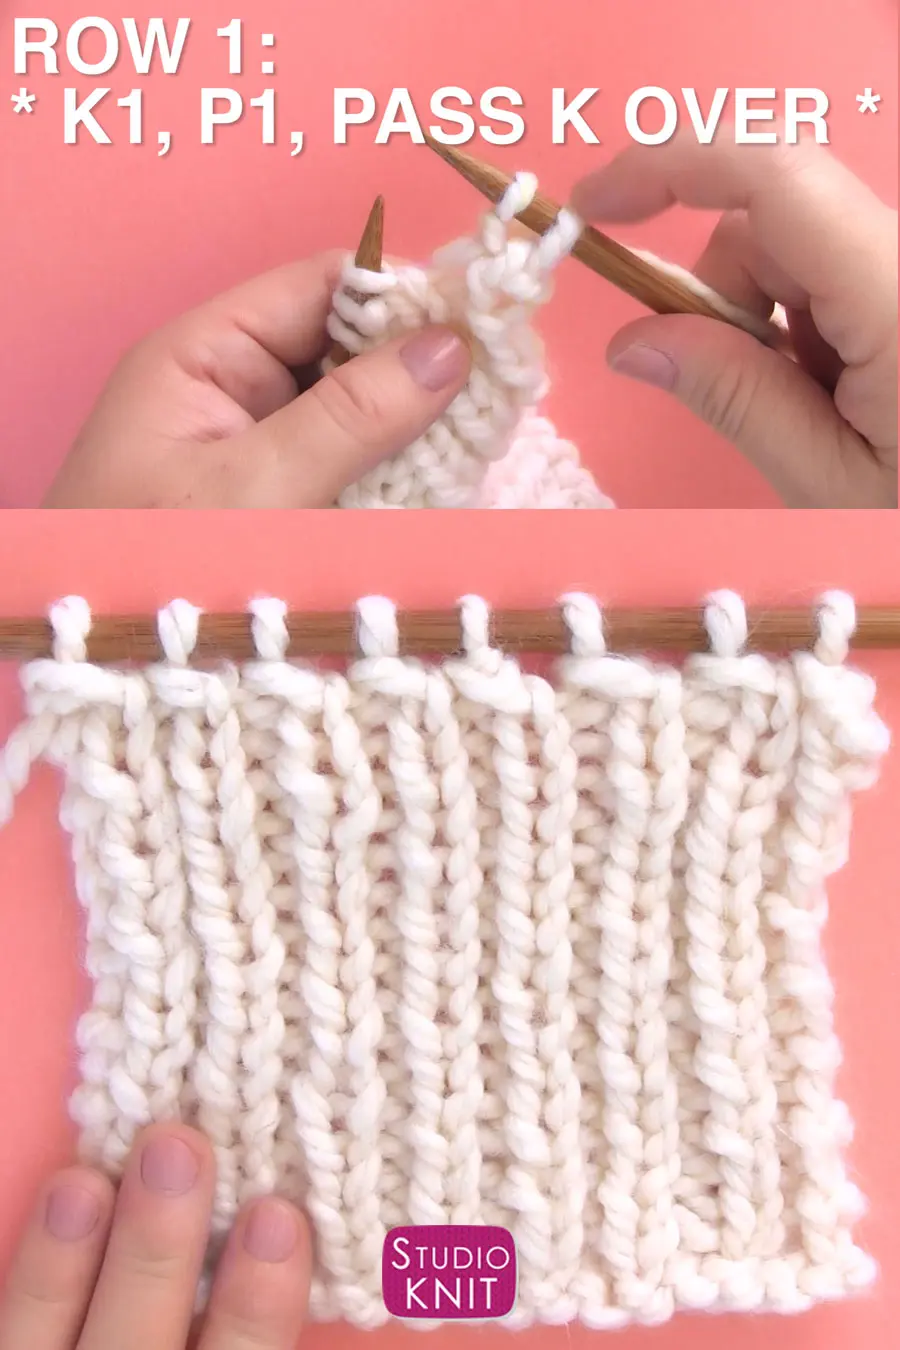 How to Knit Row 1 of the Two-Row Bind Off